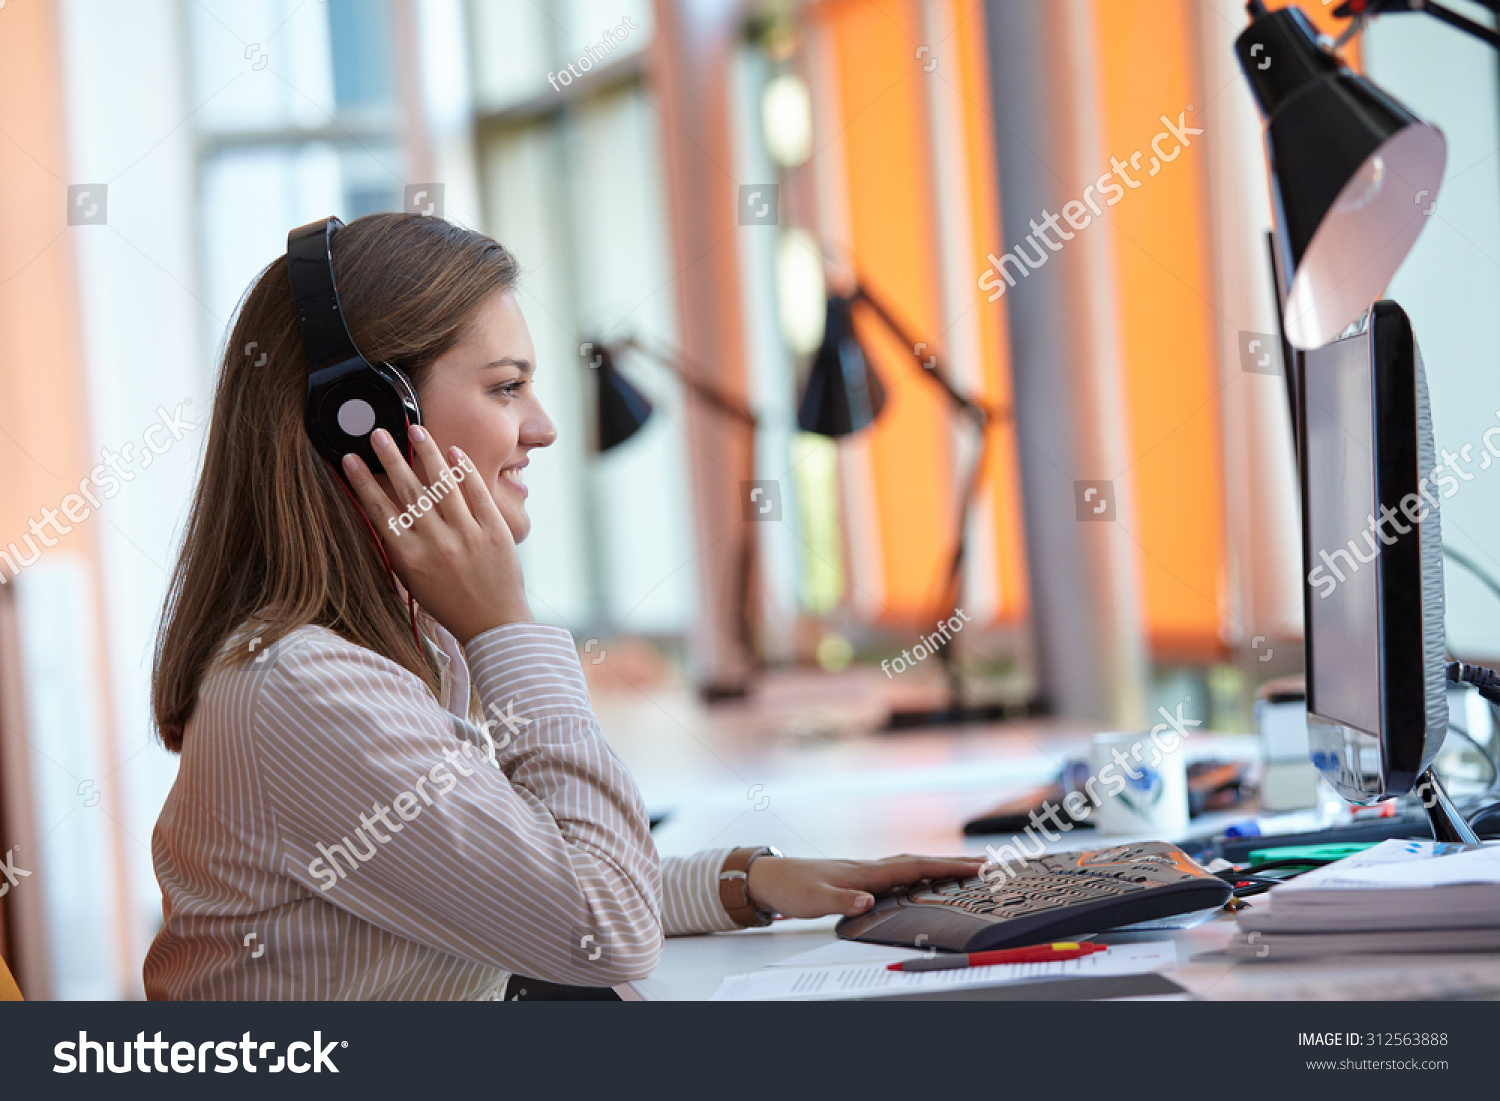 young business woman using computer at office #312563888